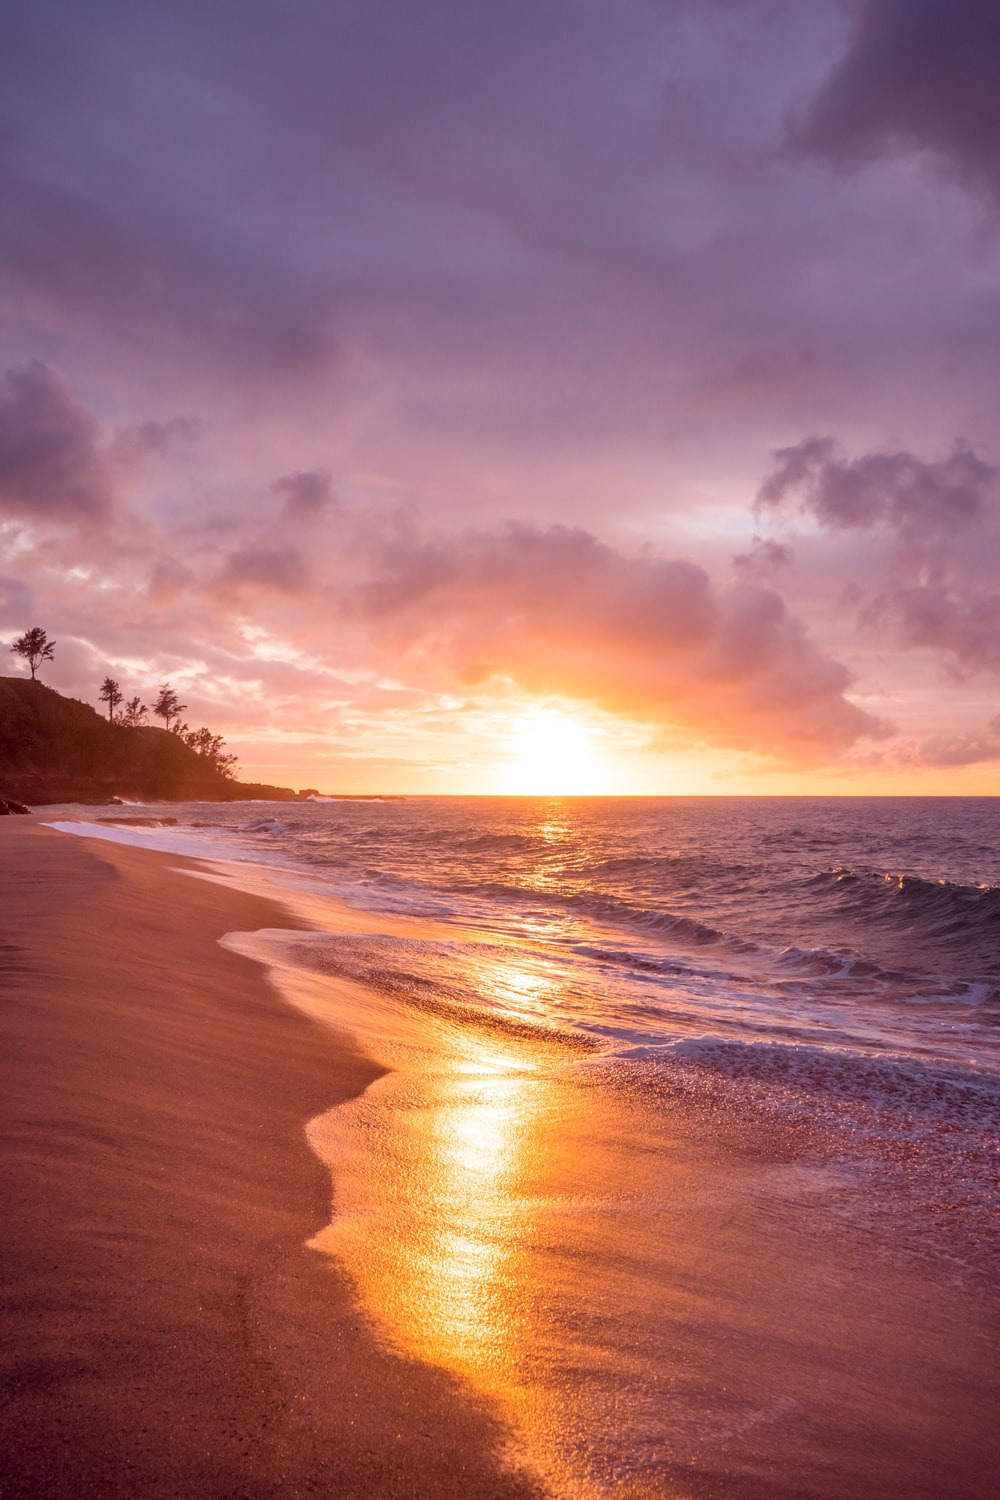 Stunning Beach Sunset Picture. Download Free Image